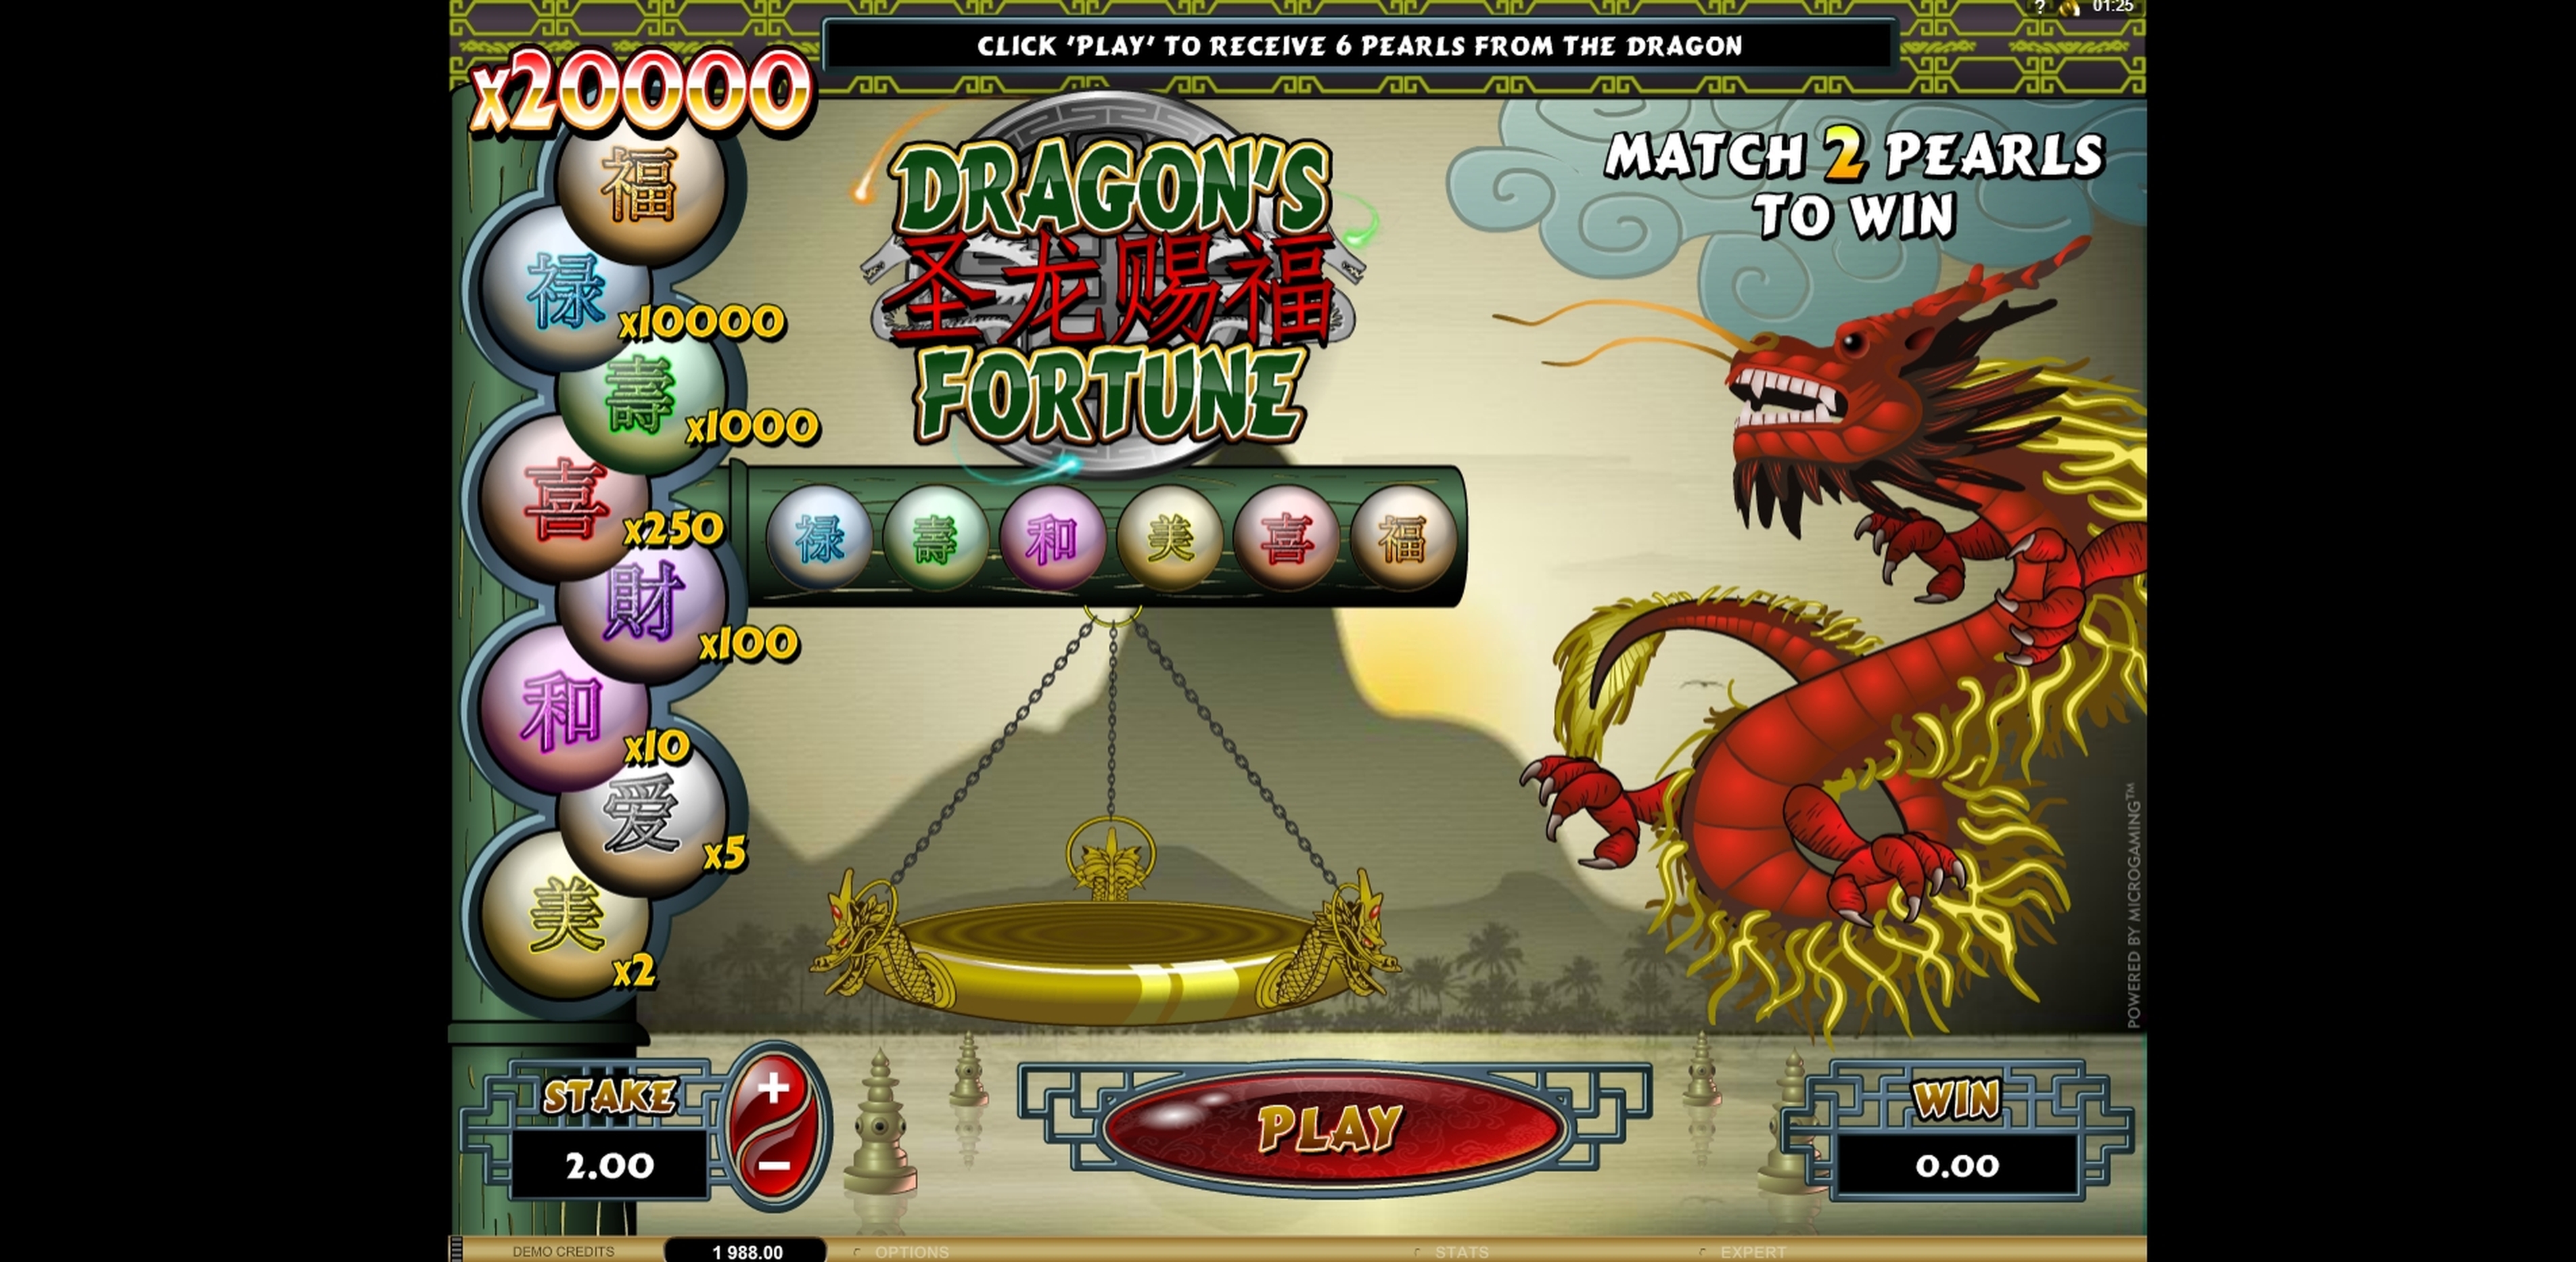 Win Money in Dragons Fortune Free Slot Game by Microgaming